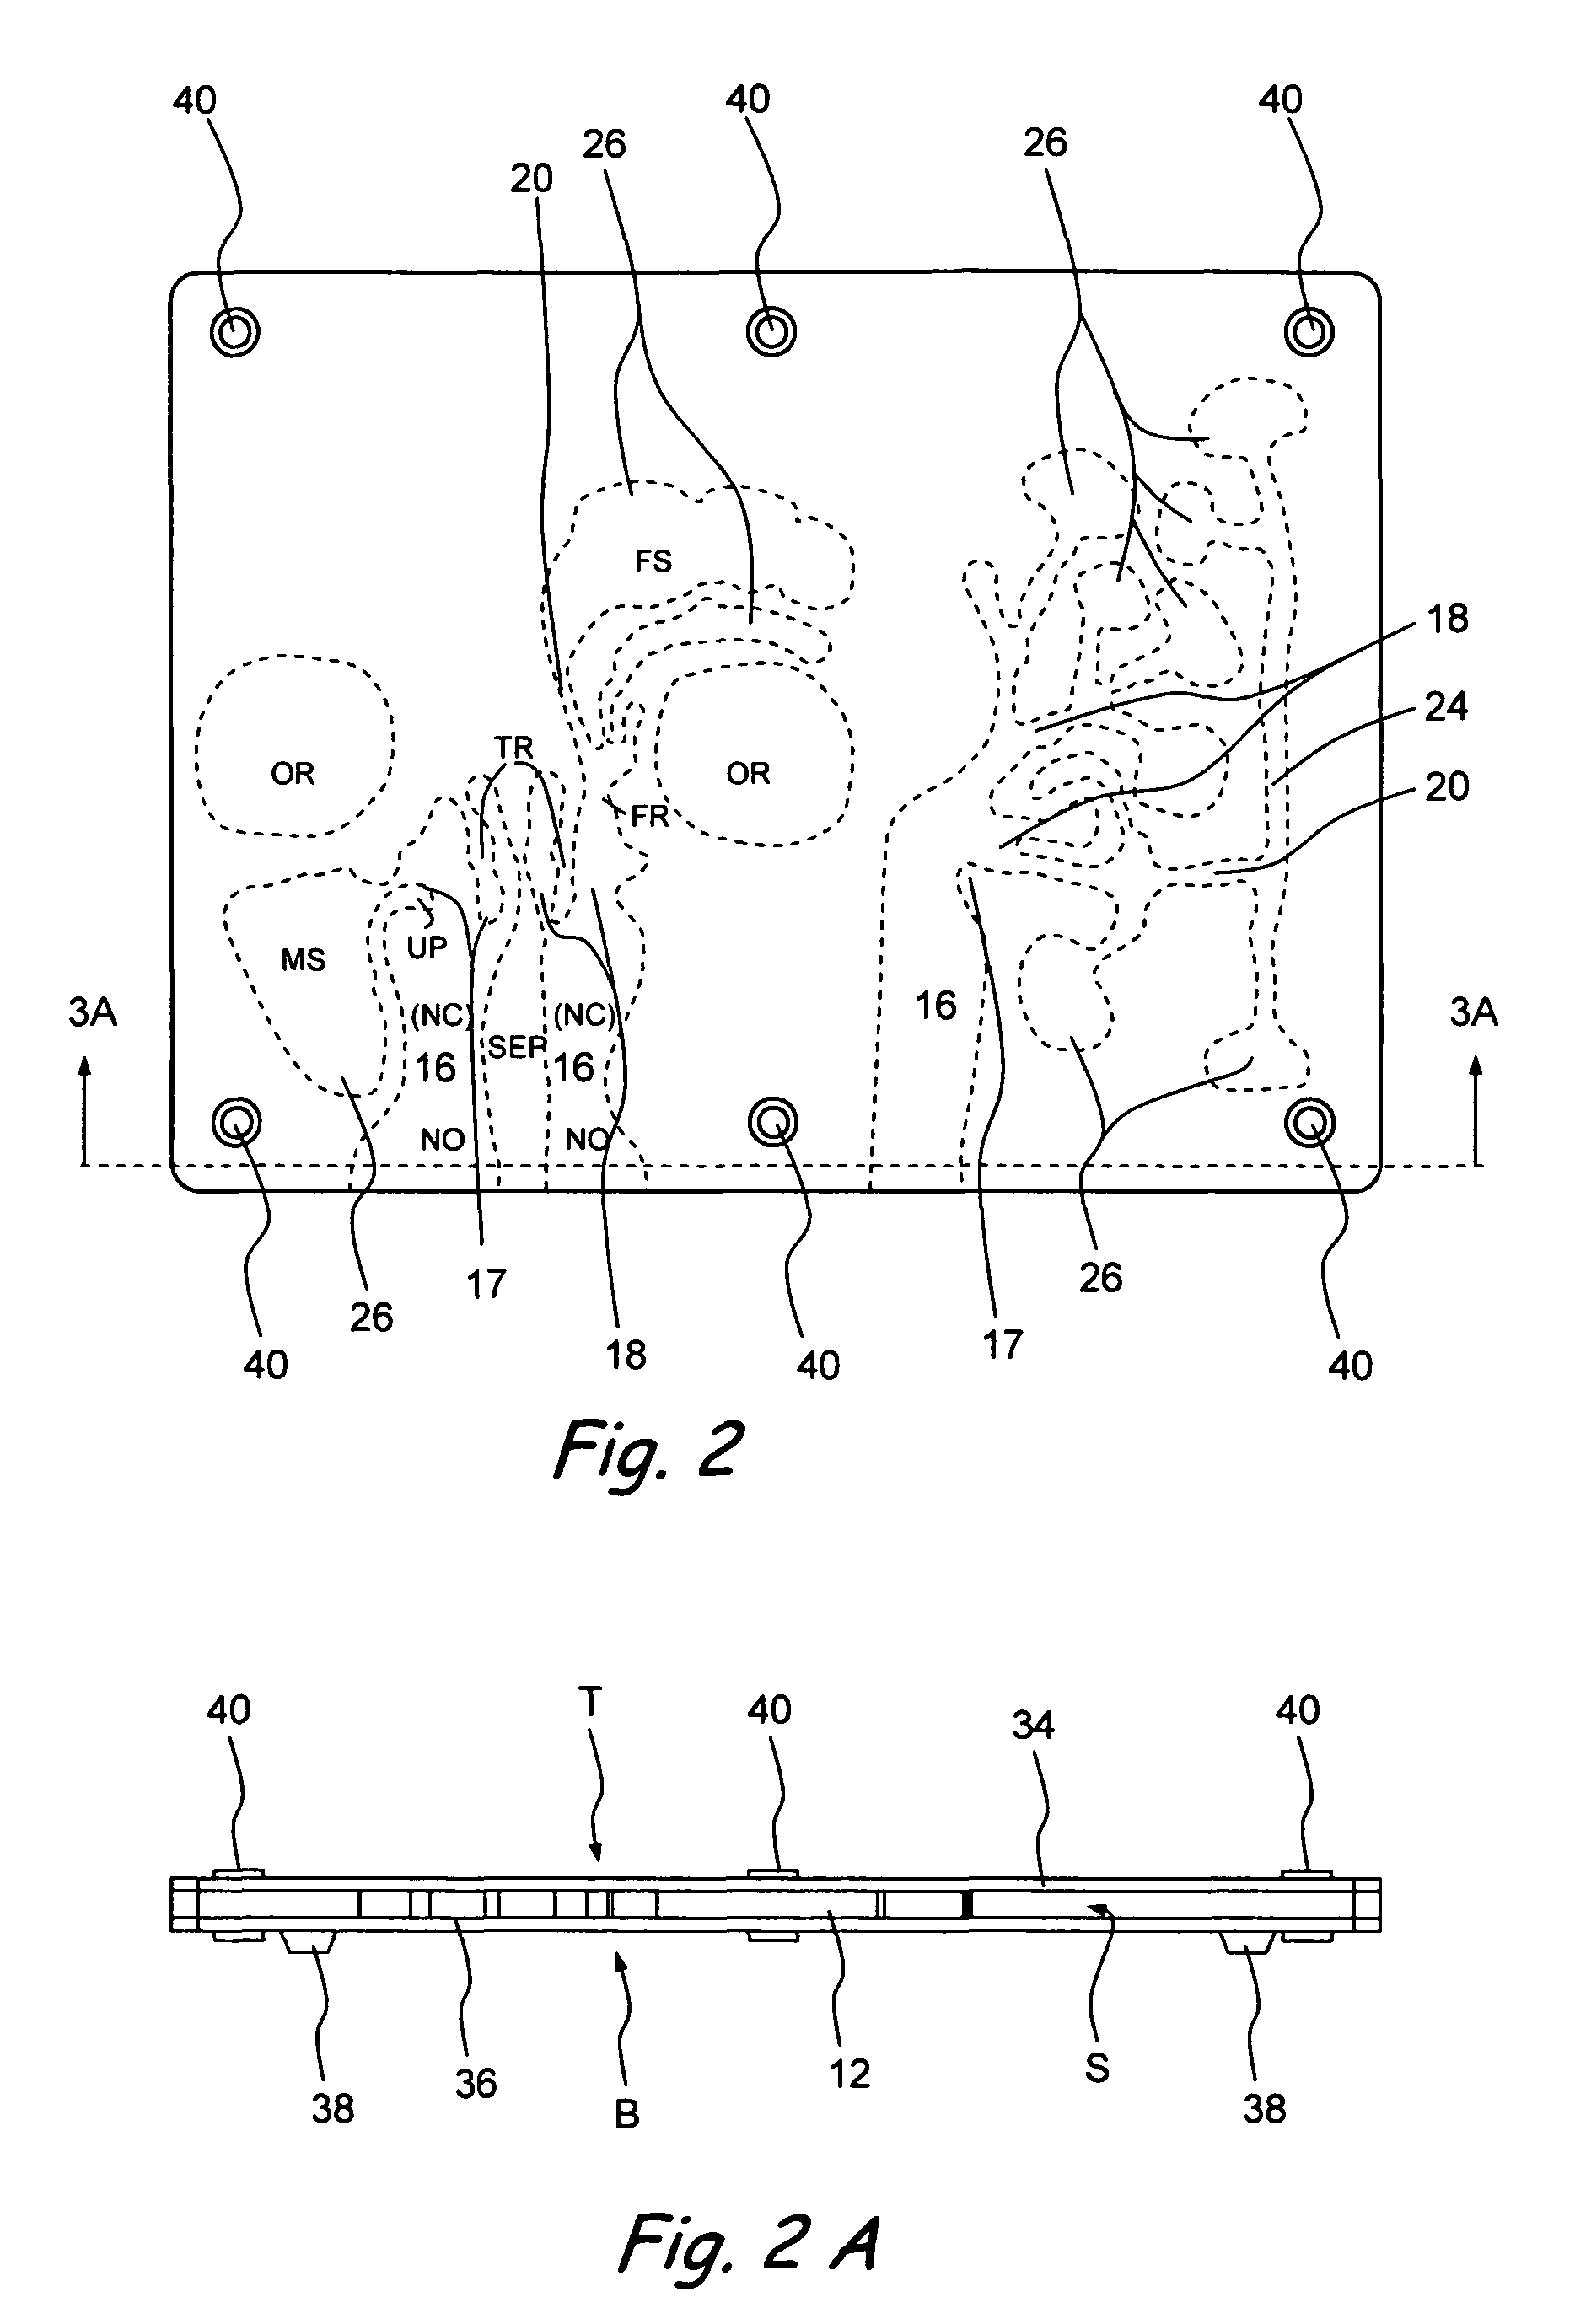 Apparatus and method for simulated insertion and positioning of guidewares and other interventional devices